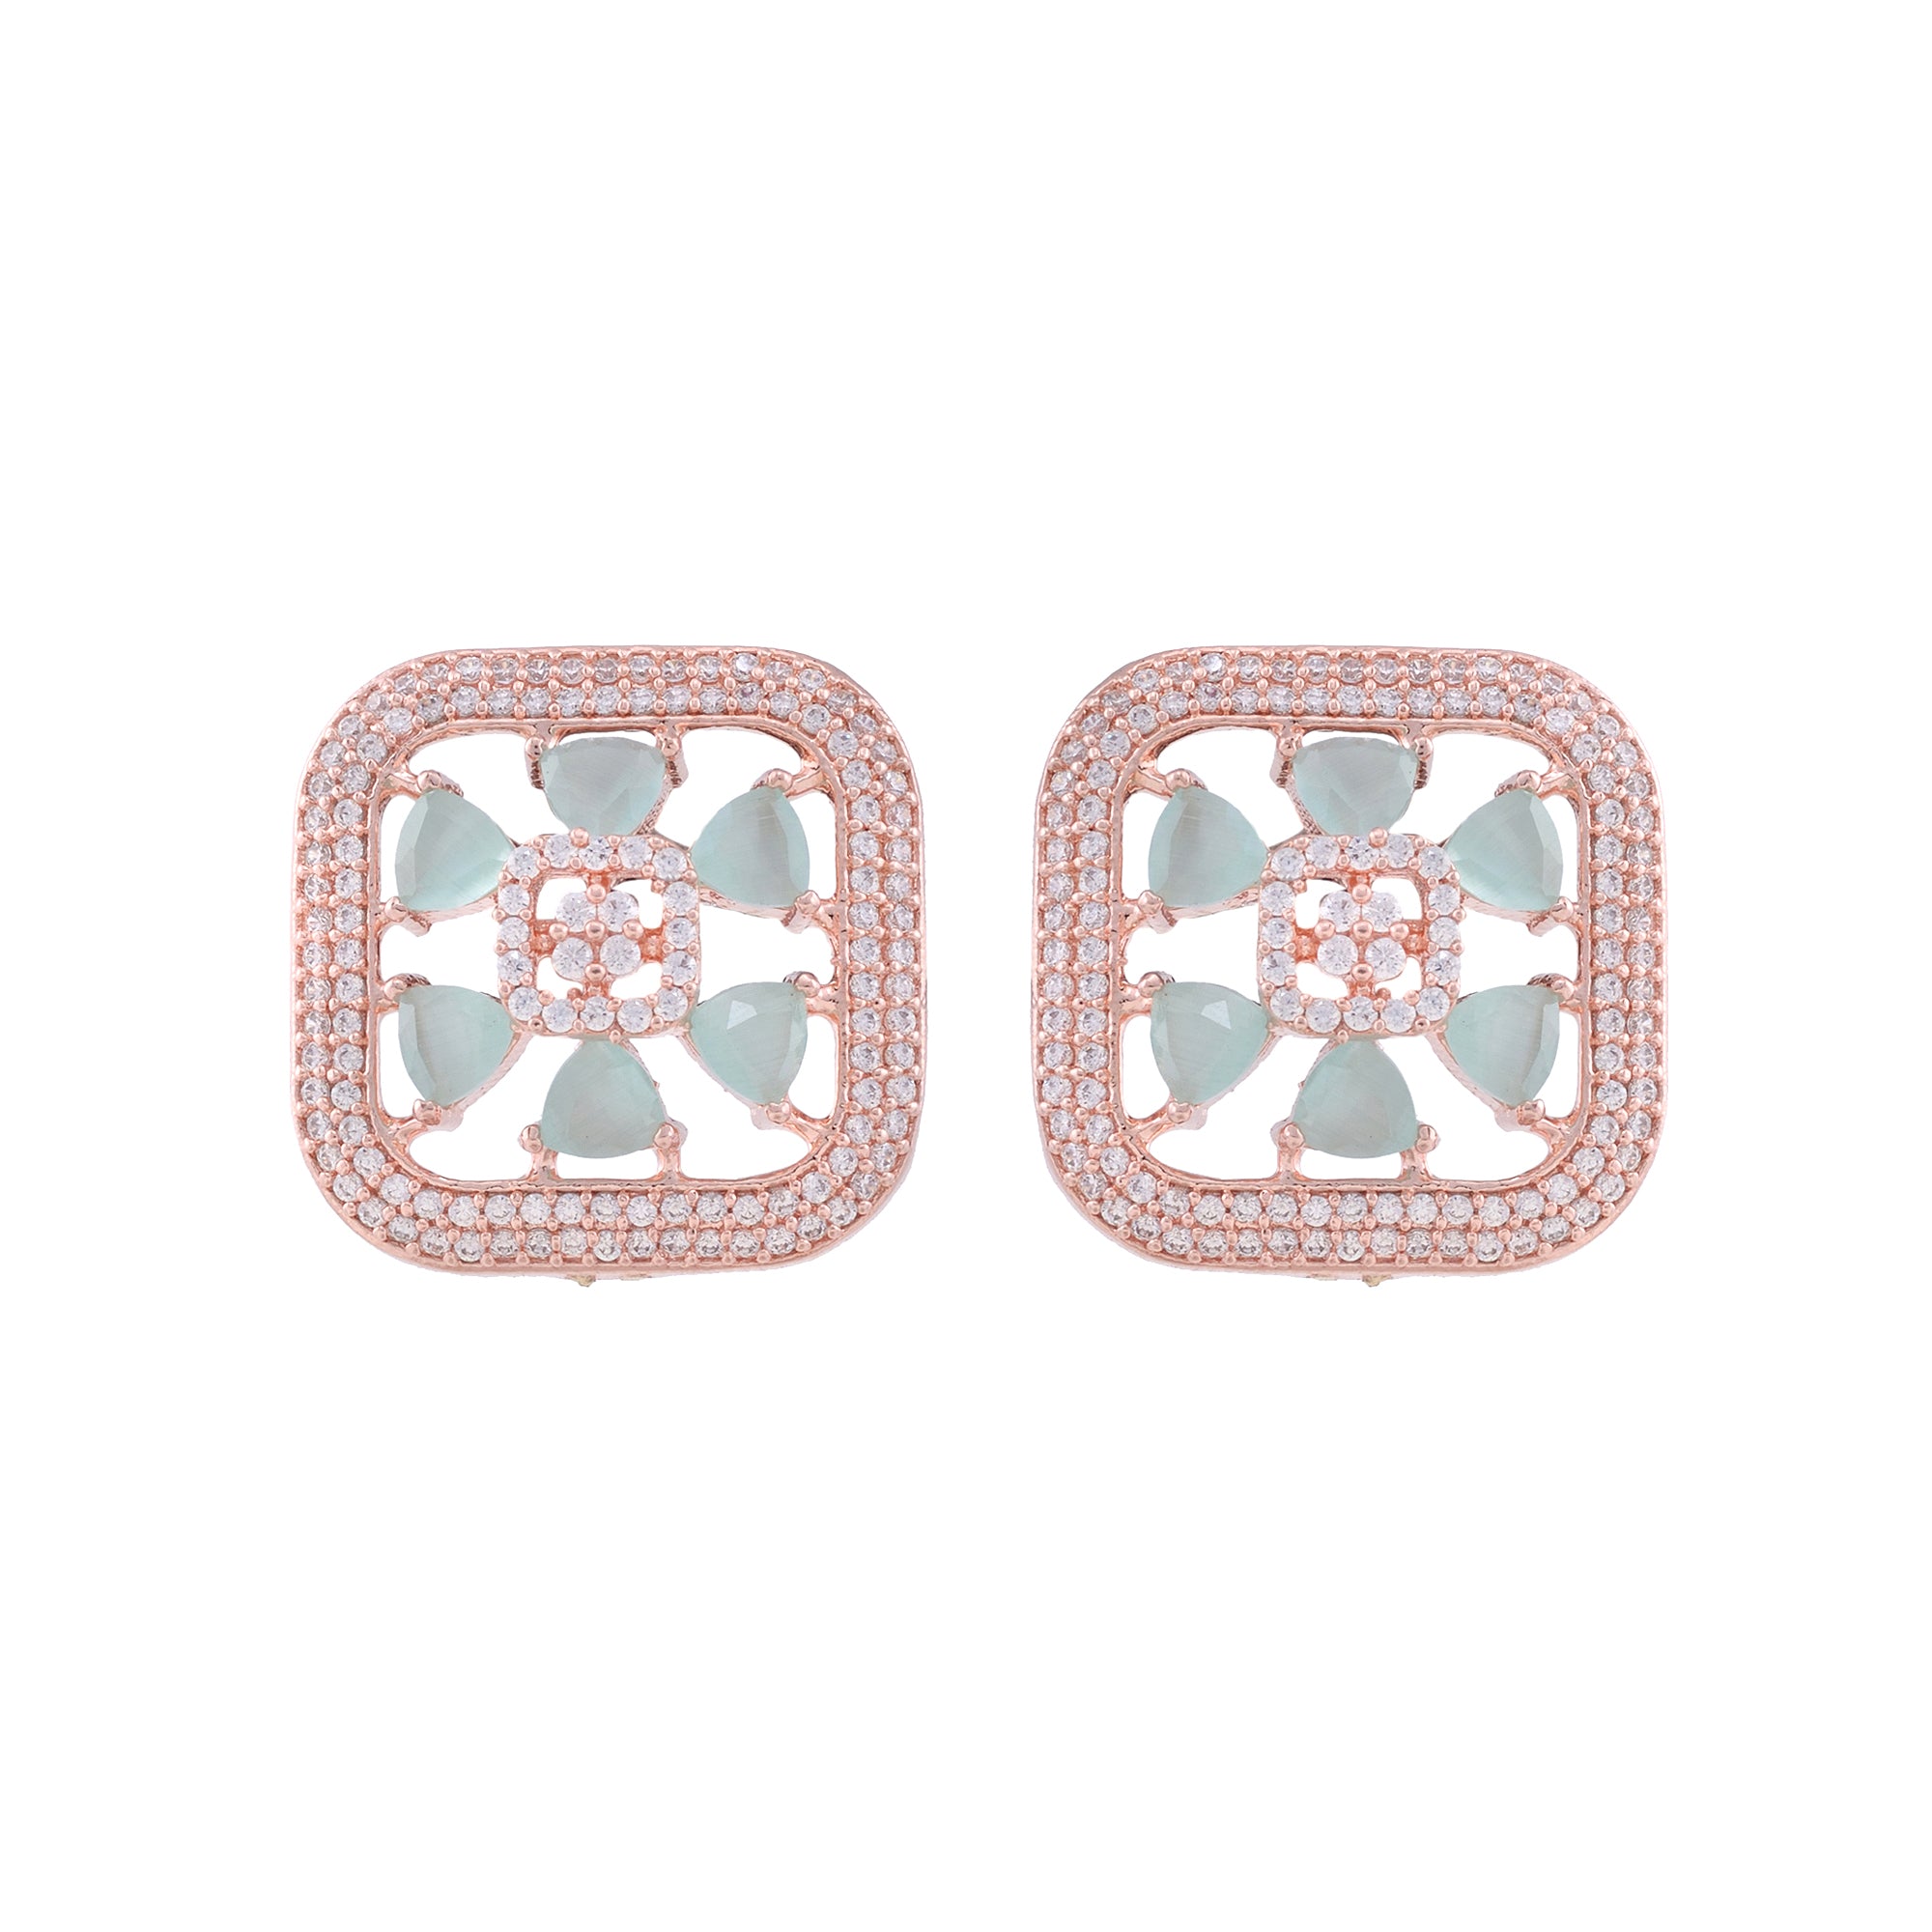 Sqaure Sleek Turquoise Studs Light Blue Ad Studded Rose Gold Plated Small Earrings for Women and Girls - Saraf RS Jewellery